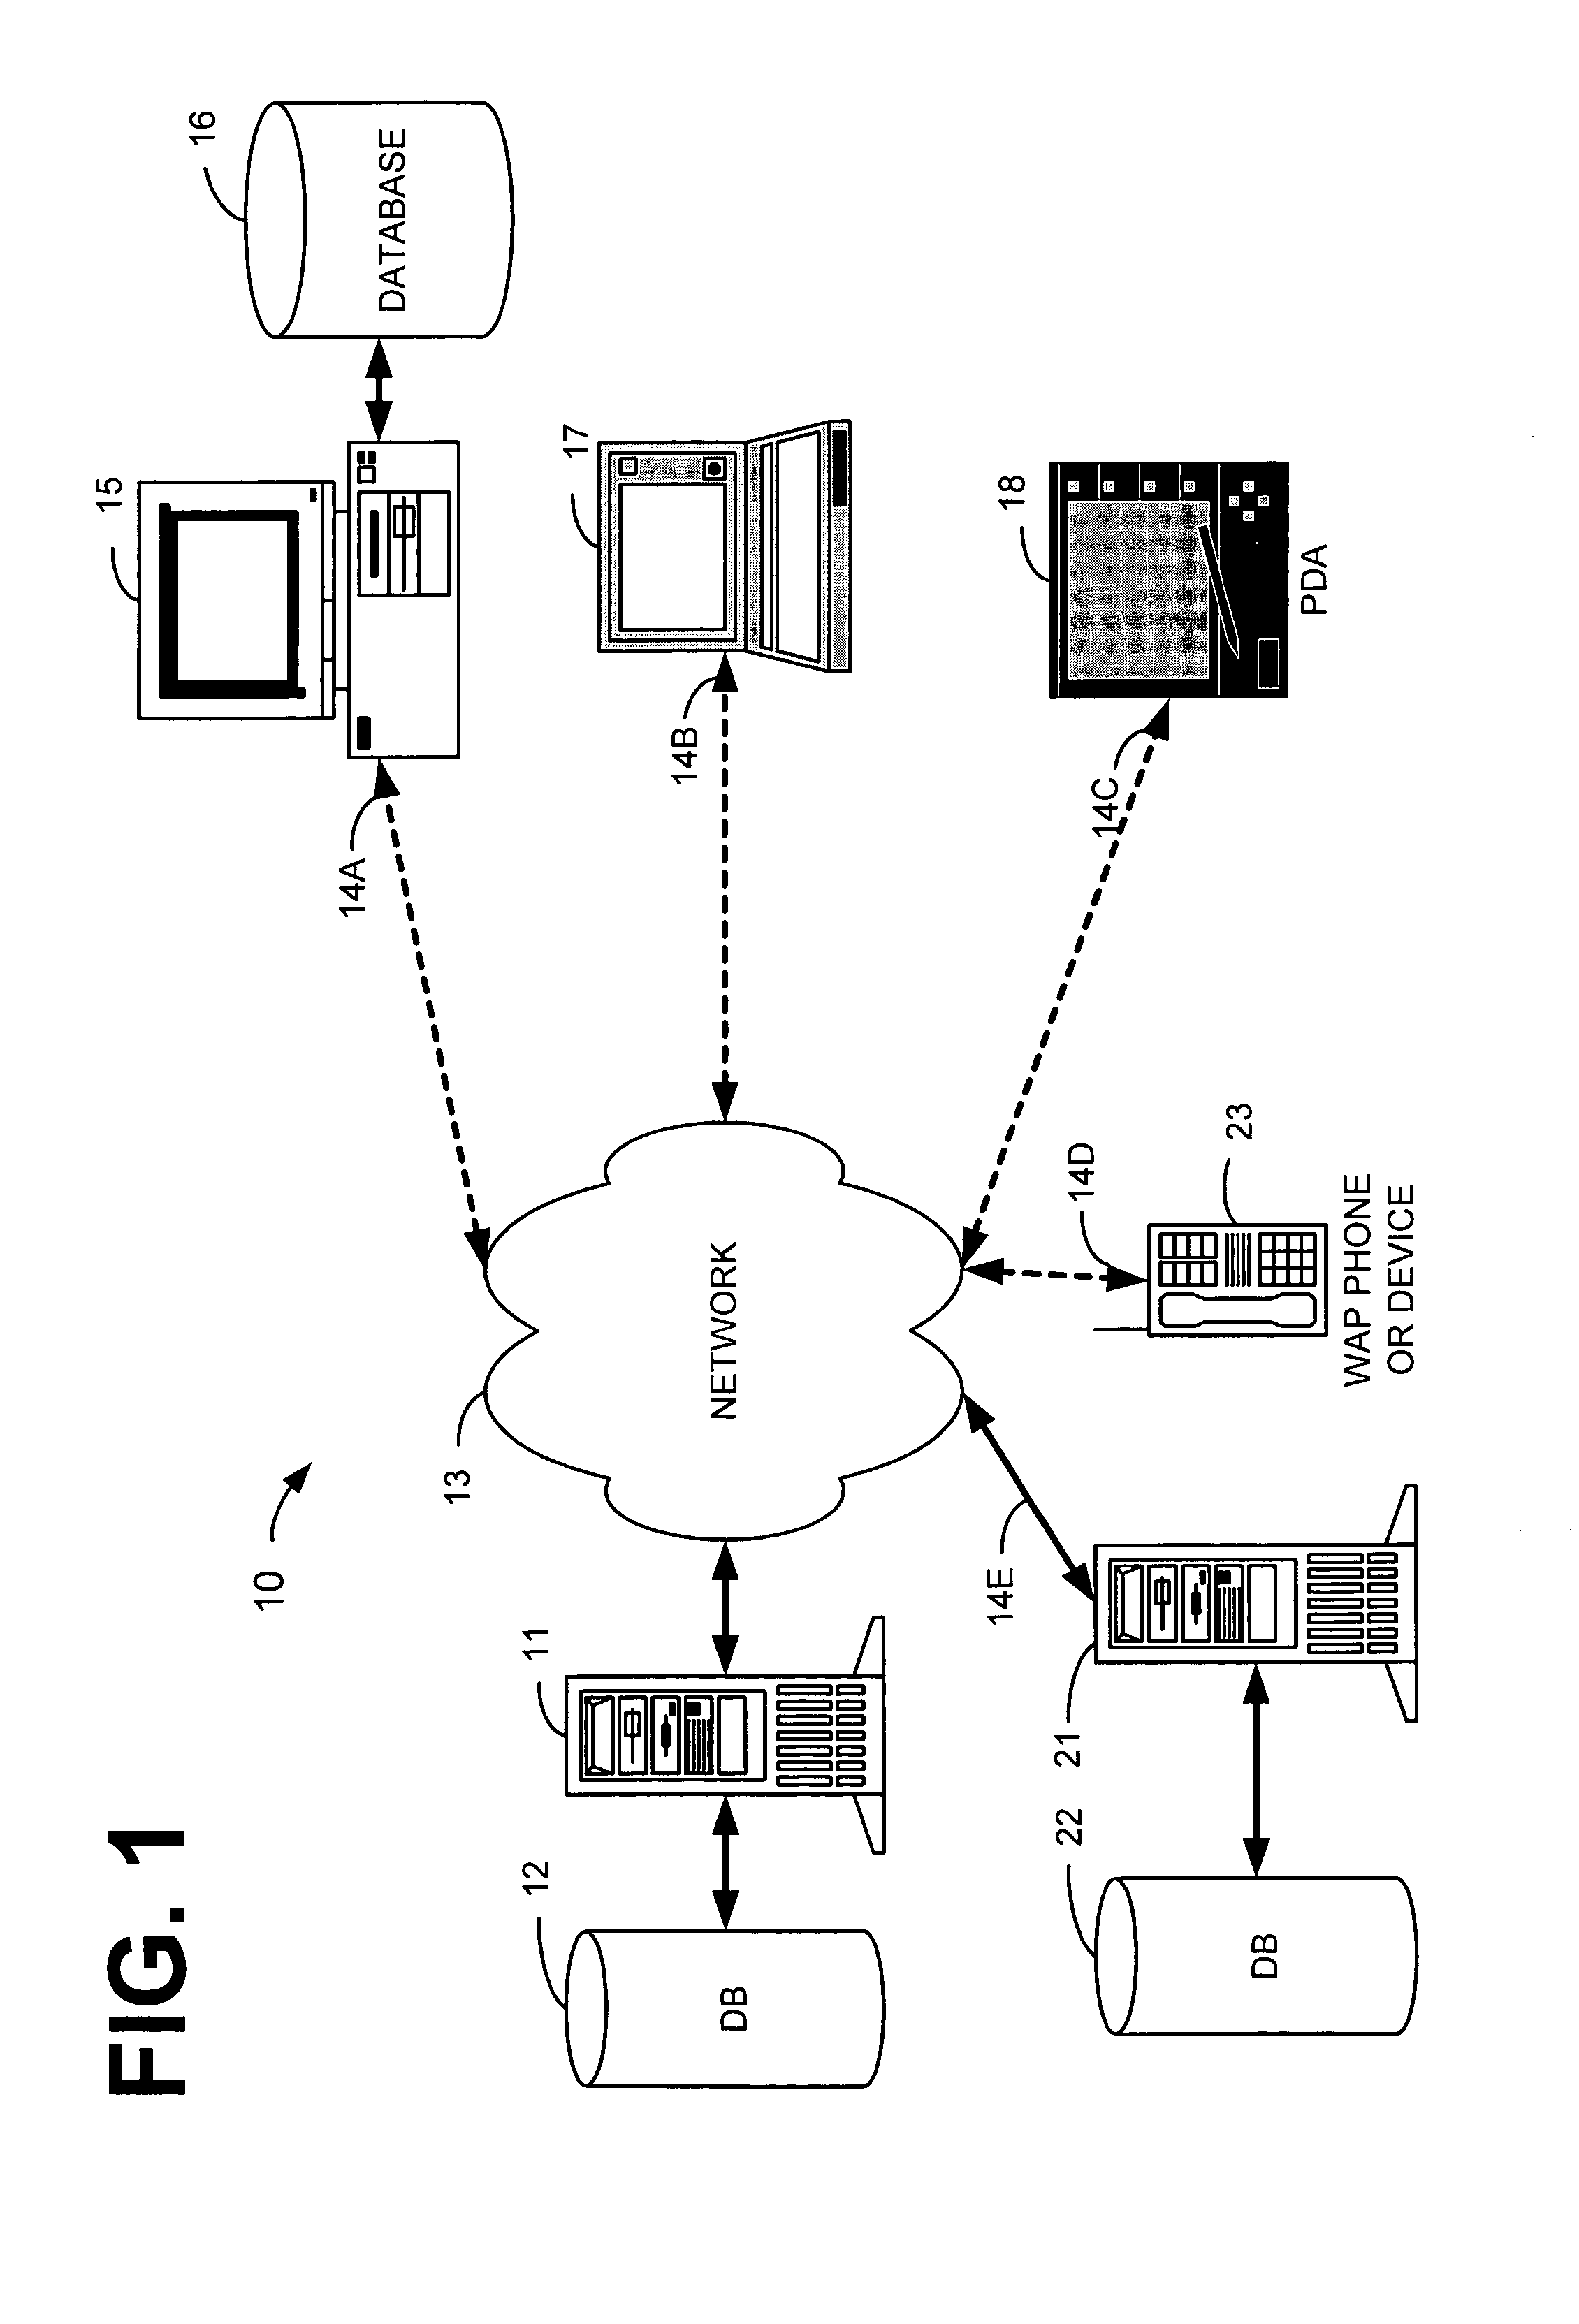 System and method for providing notification on remote devices